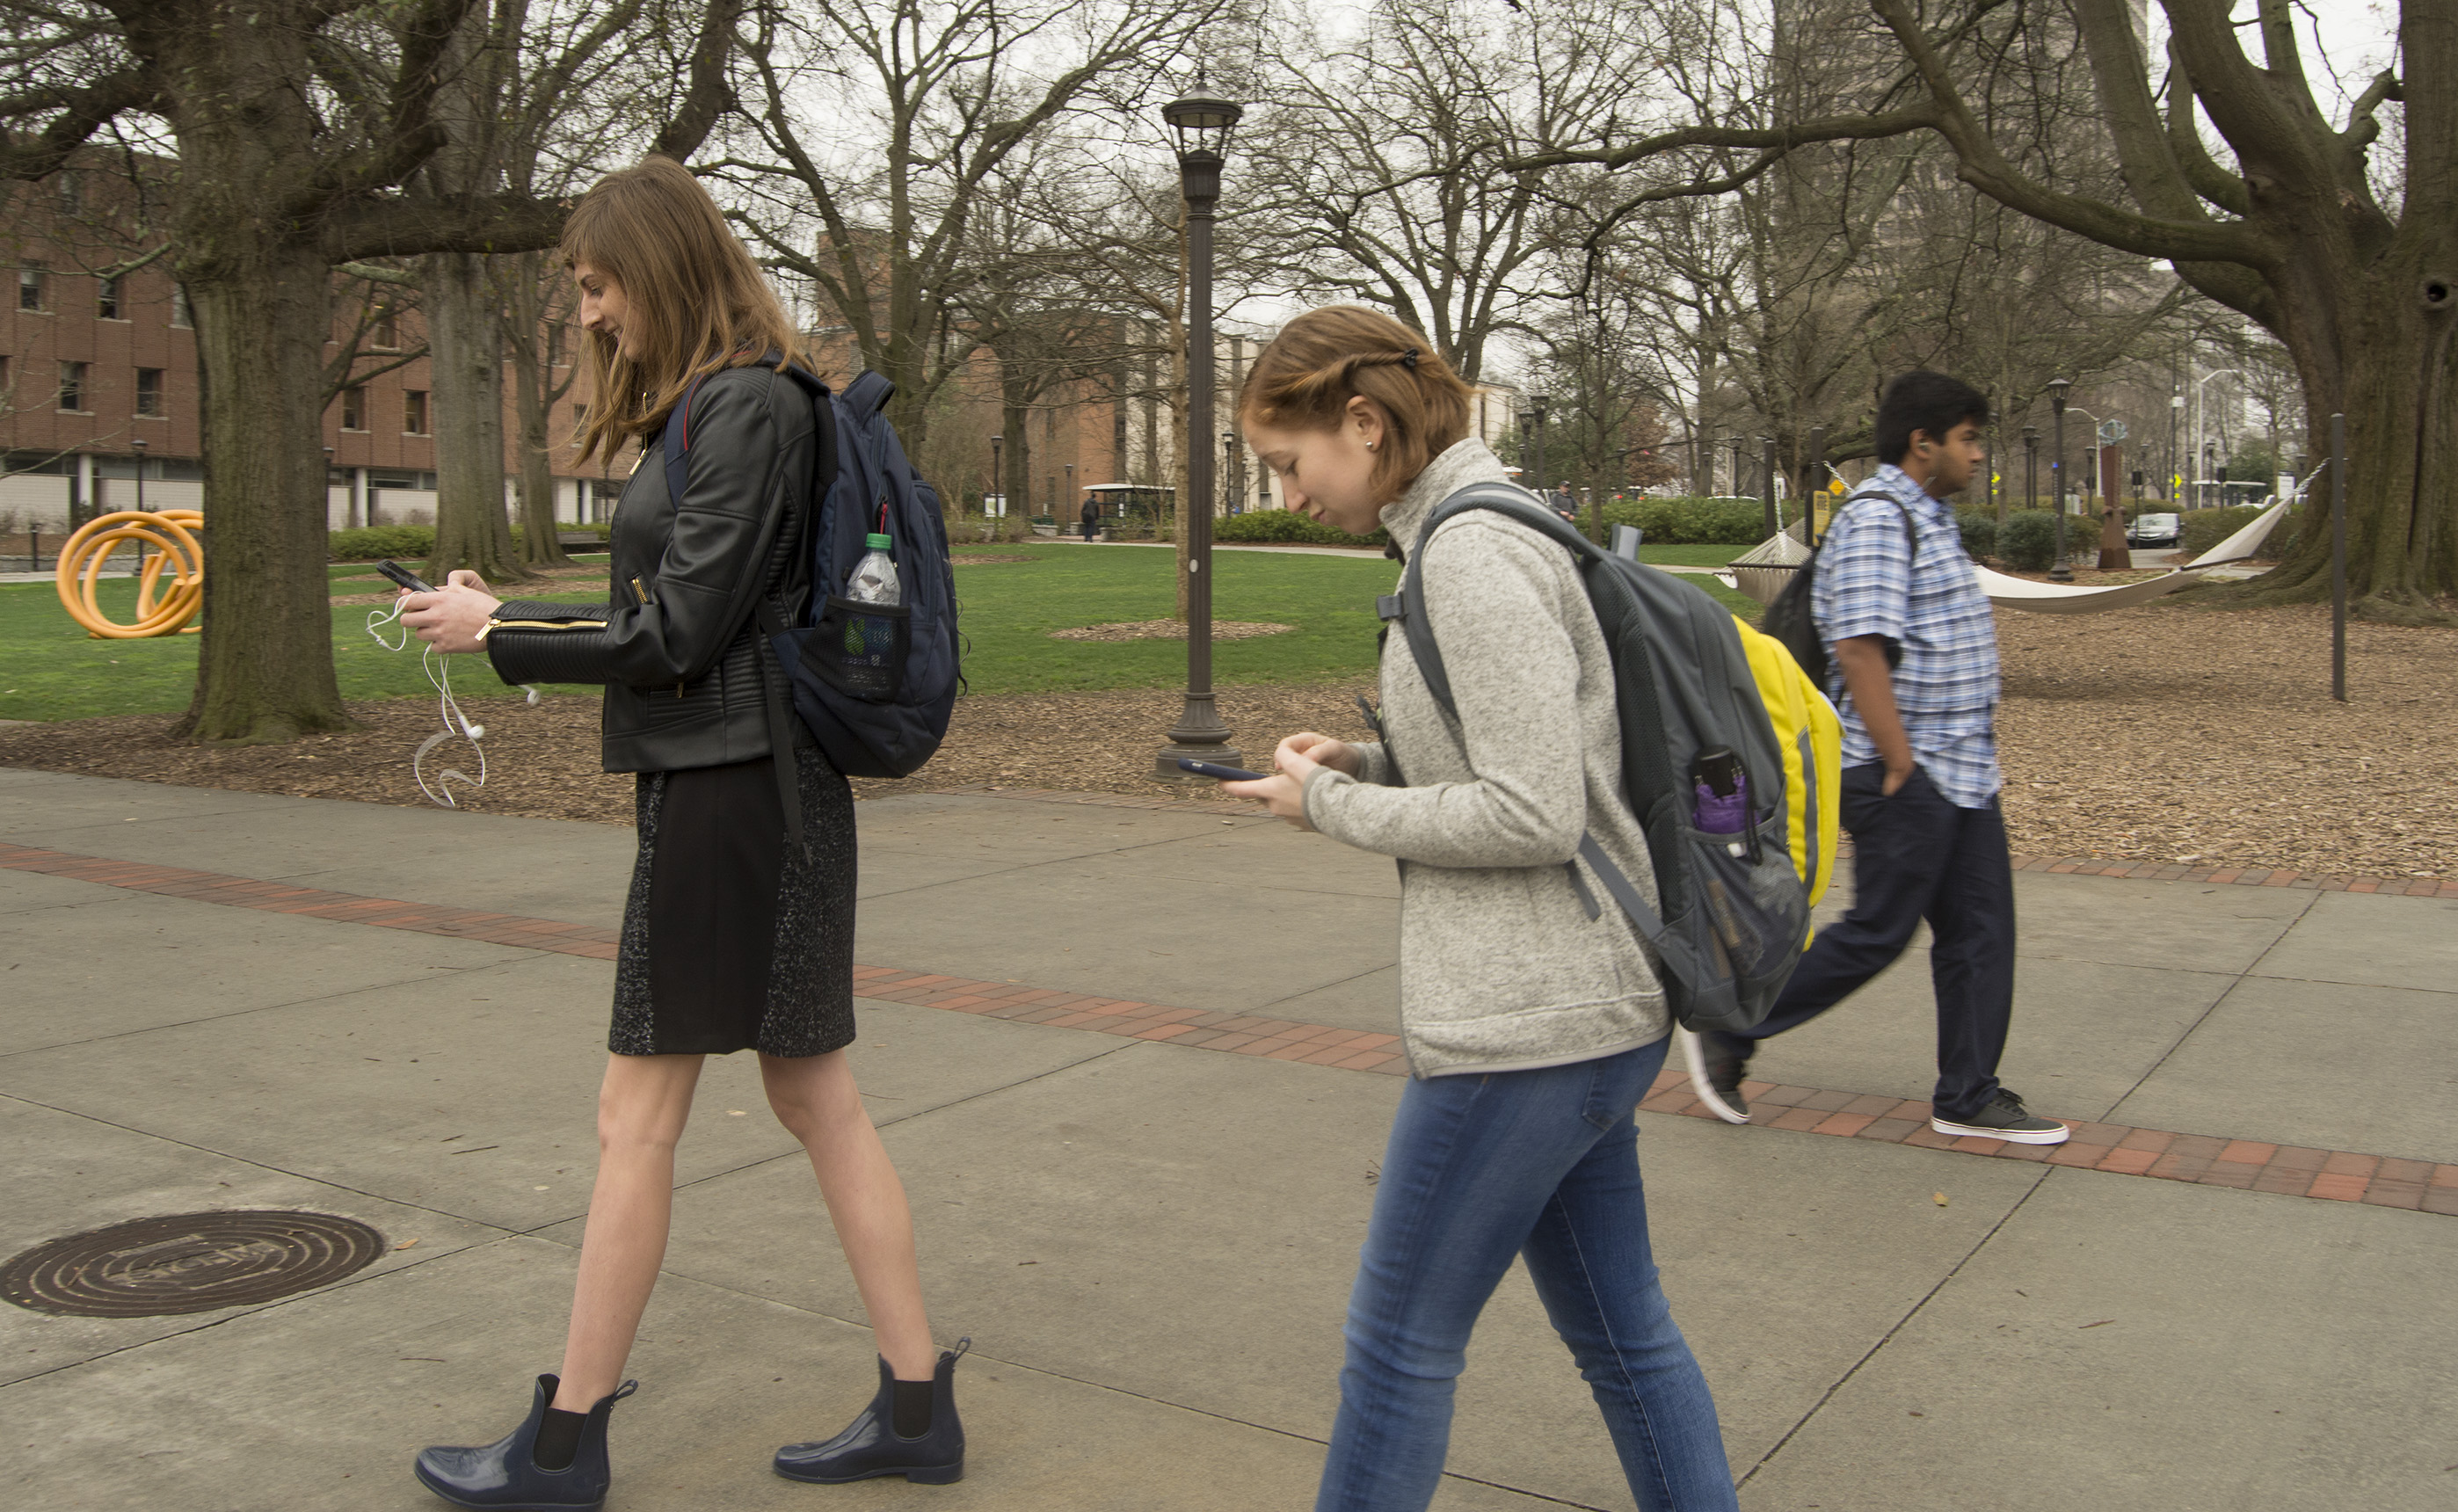 Students walking while focused on their smartphones are a familiar sight on the Georgia Tech campus.